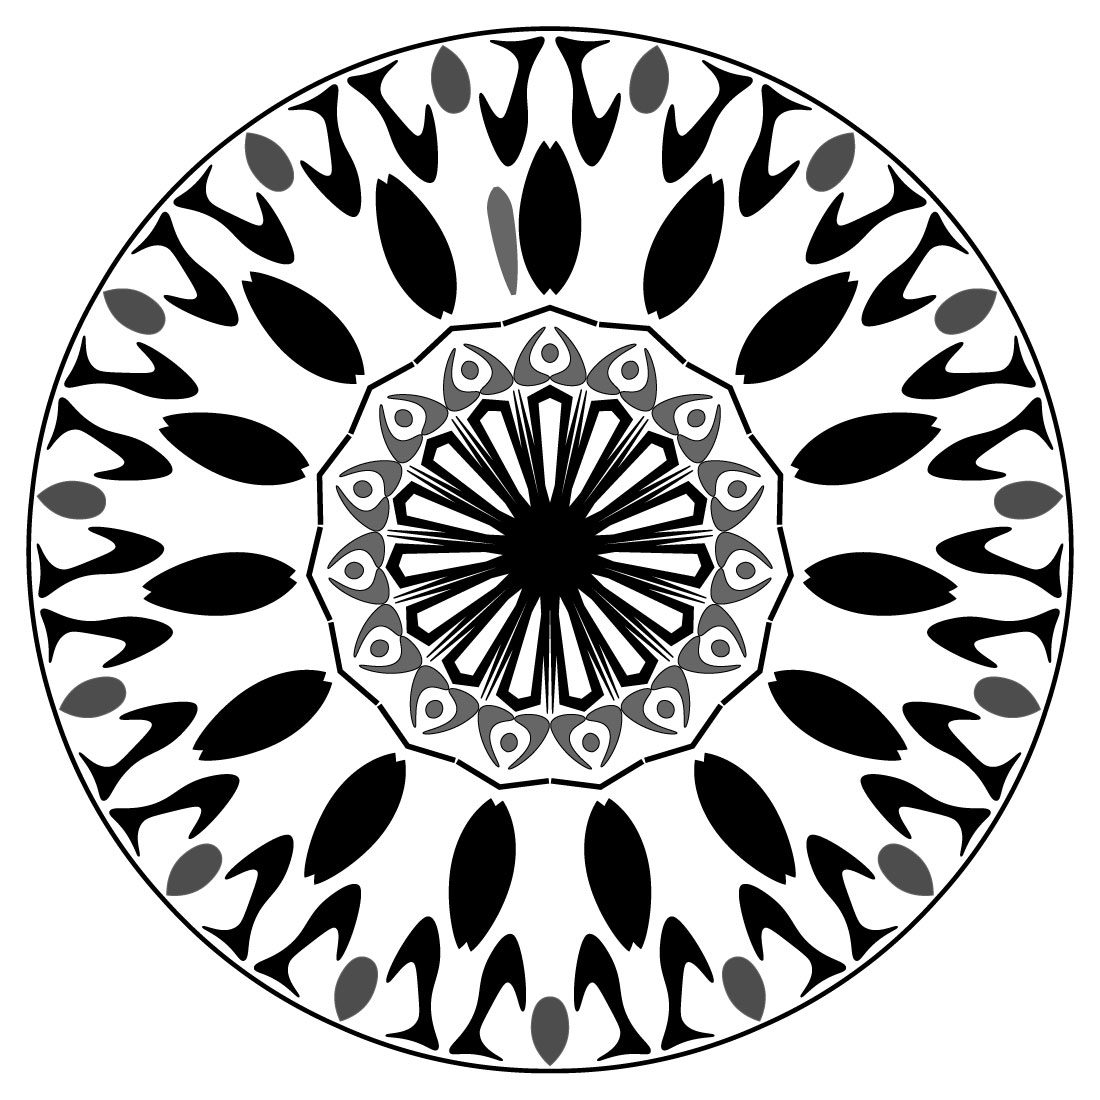 Mandala-Art-with-rounded-black-and-white cover image.